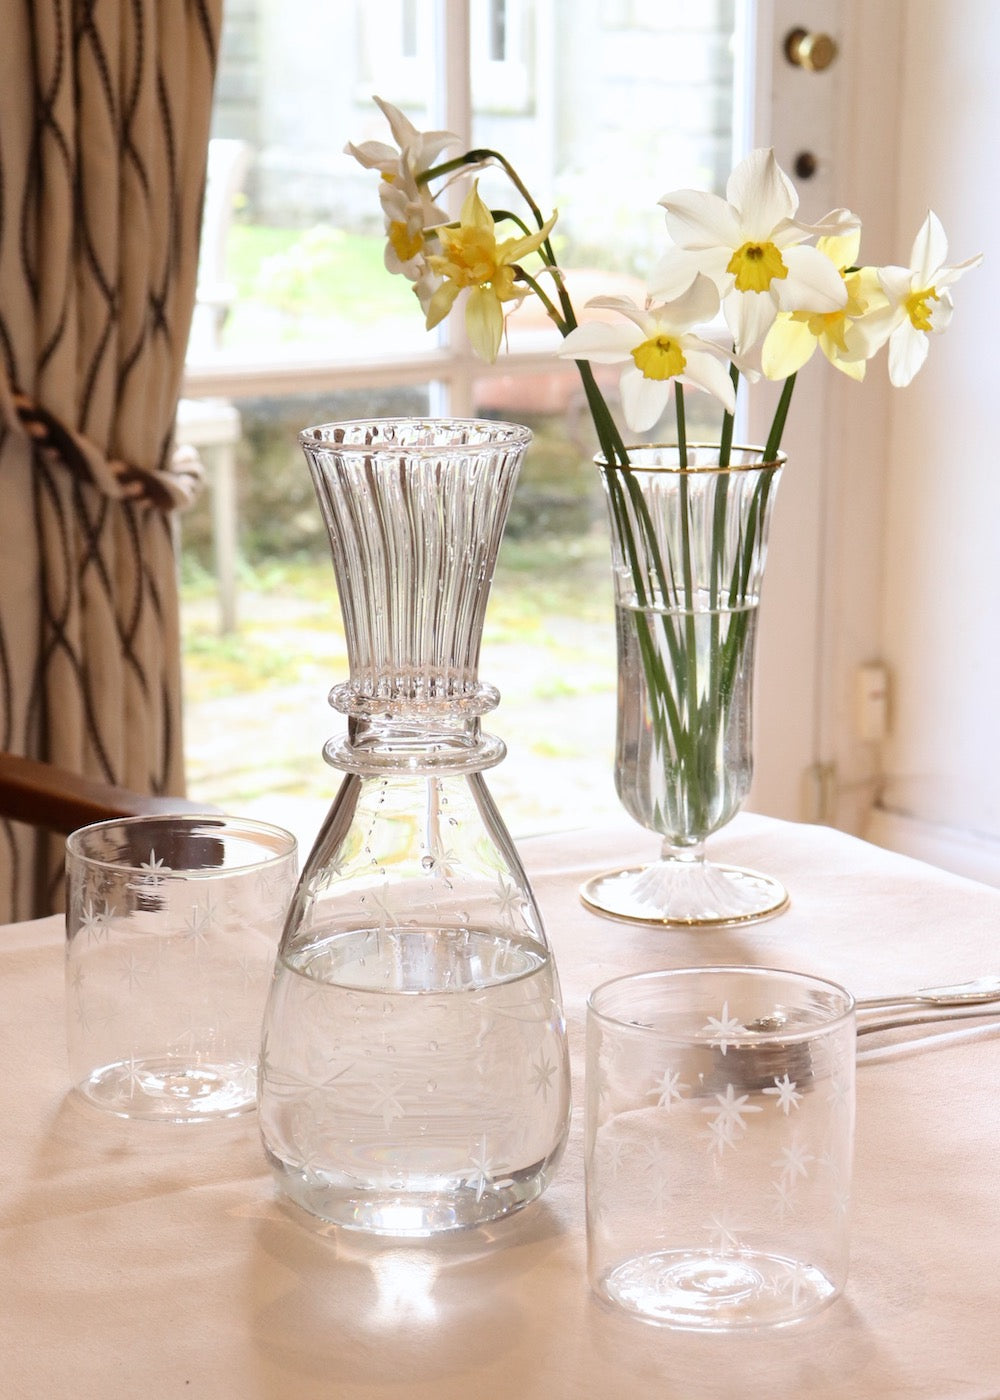 Carafe and Glass Set  - Etched Glass